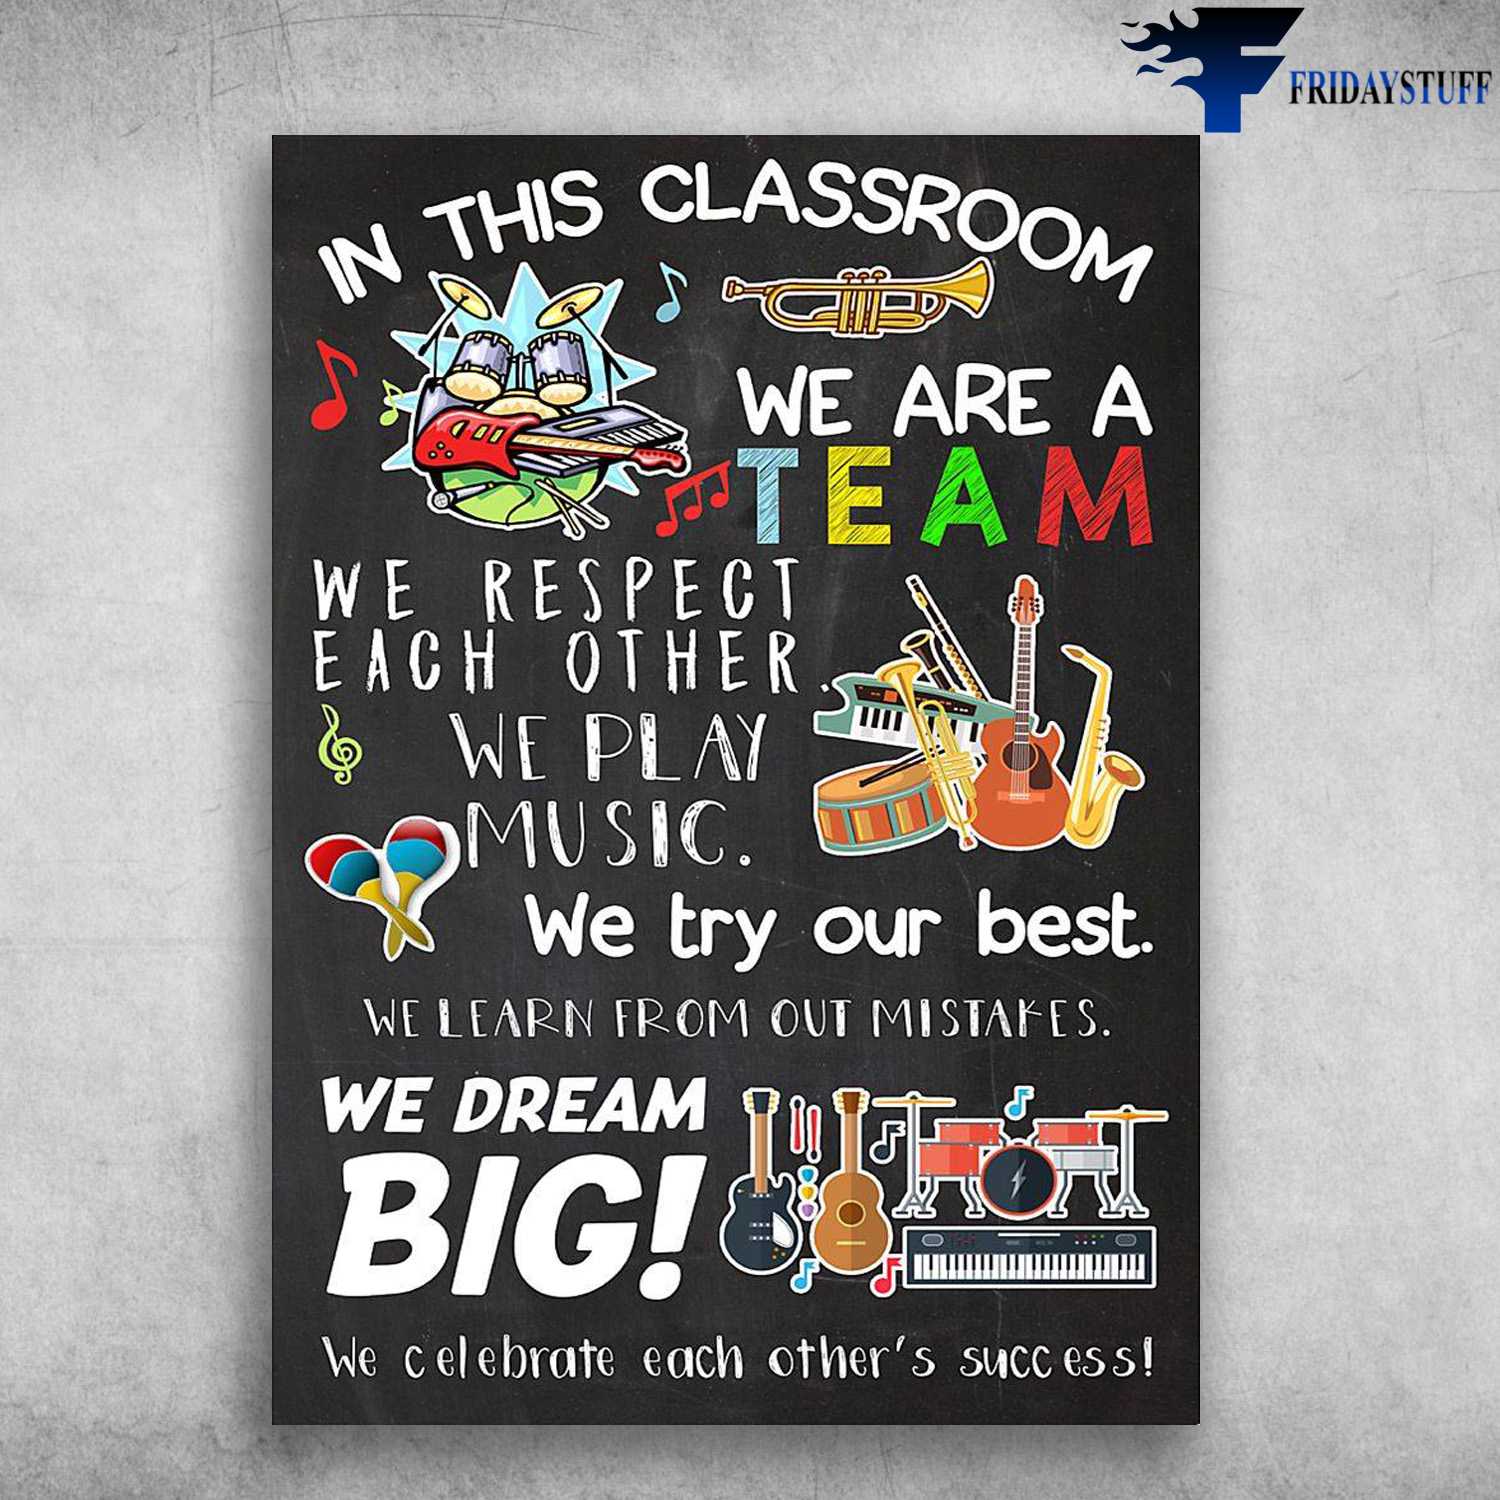 Classroom Rule - In This Classrom, We Are A Team, We Respect Each Other, We Play Music, We Try Out Best, We Learn From Out Mistakes, We Dream Big, We Celebrate Each Other's Success